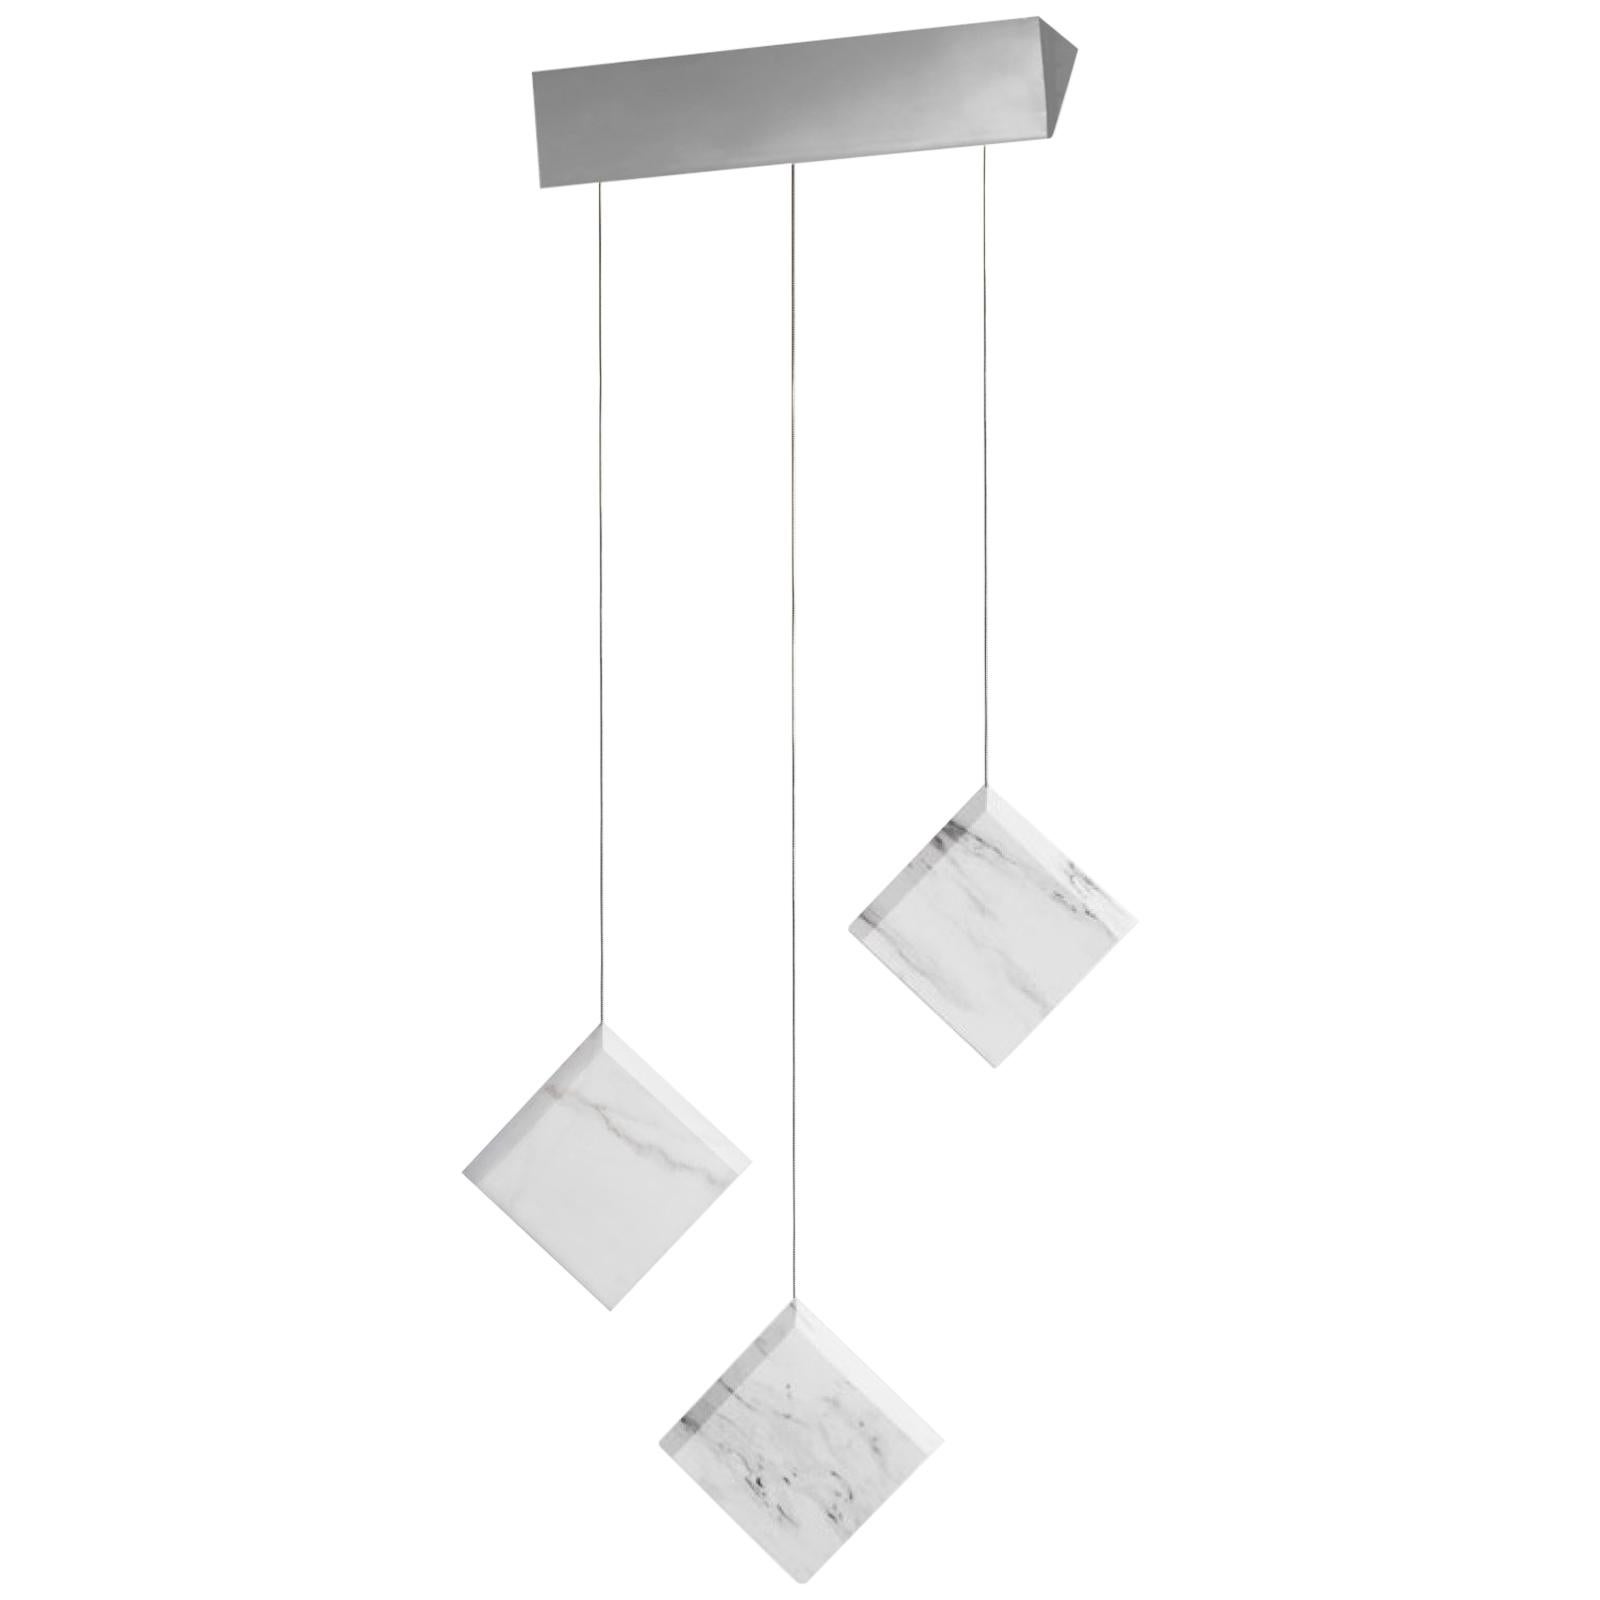 Marble Ceiling lamp "Werner Jr. Carrara" Satin Silver Mount in Stock For Sale